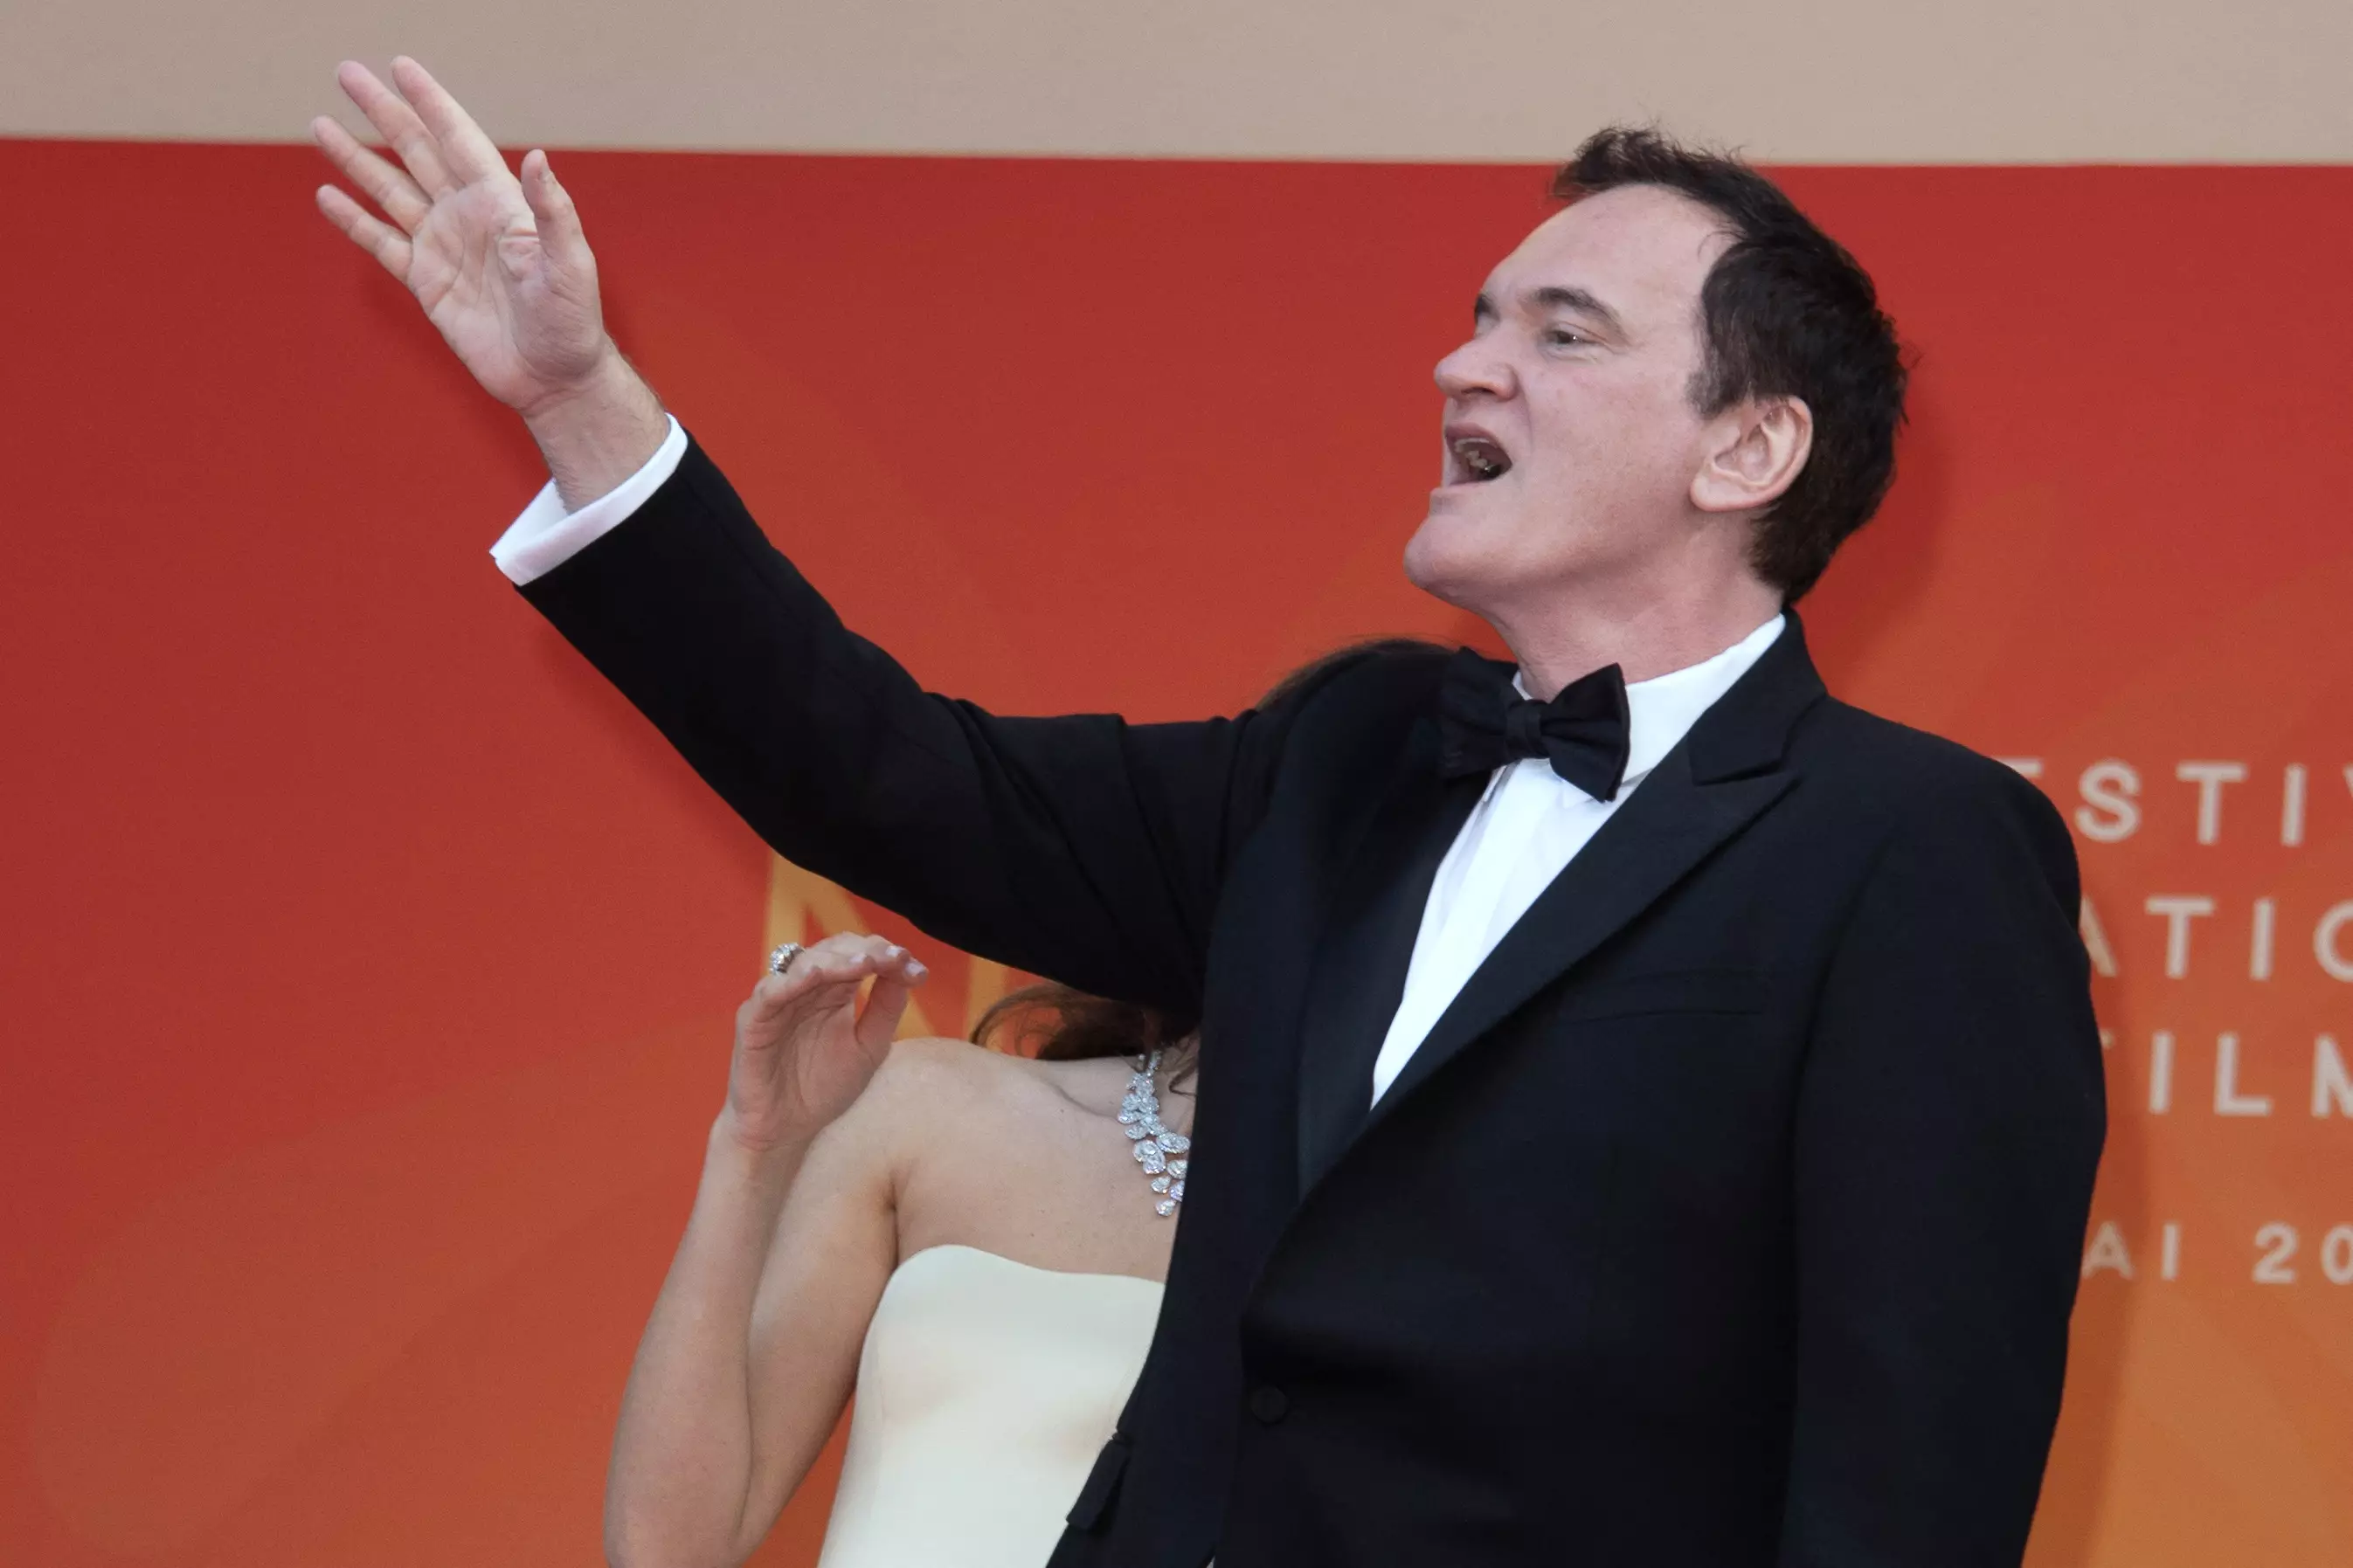 Is Quentin Tarantino about to wave goodbye to directing altogether?